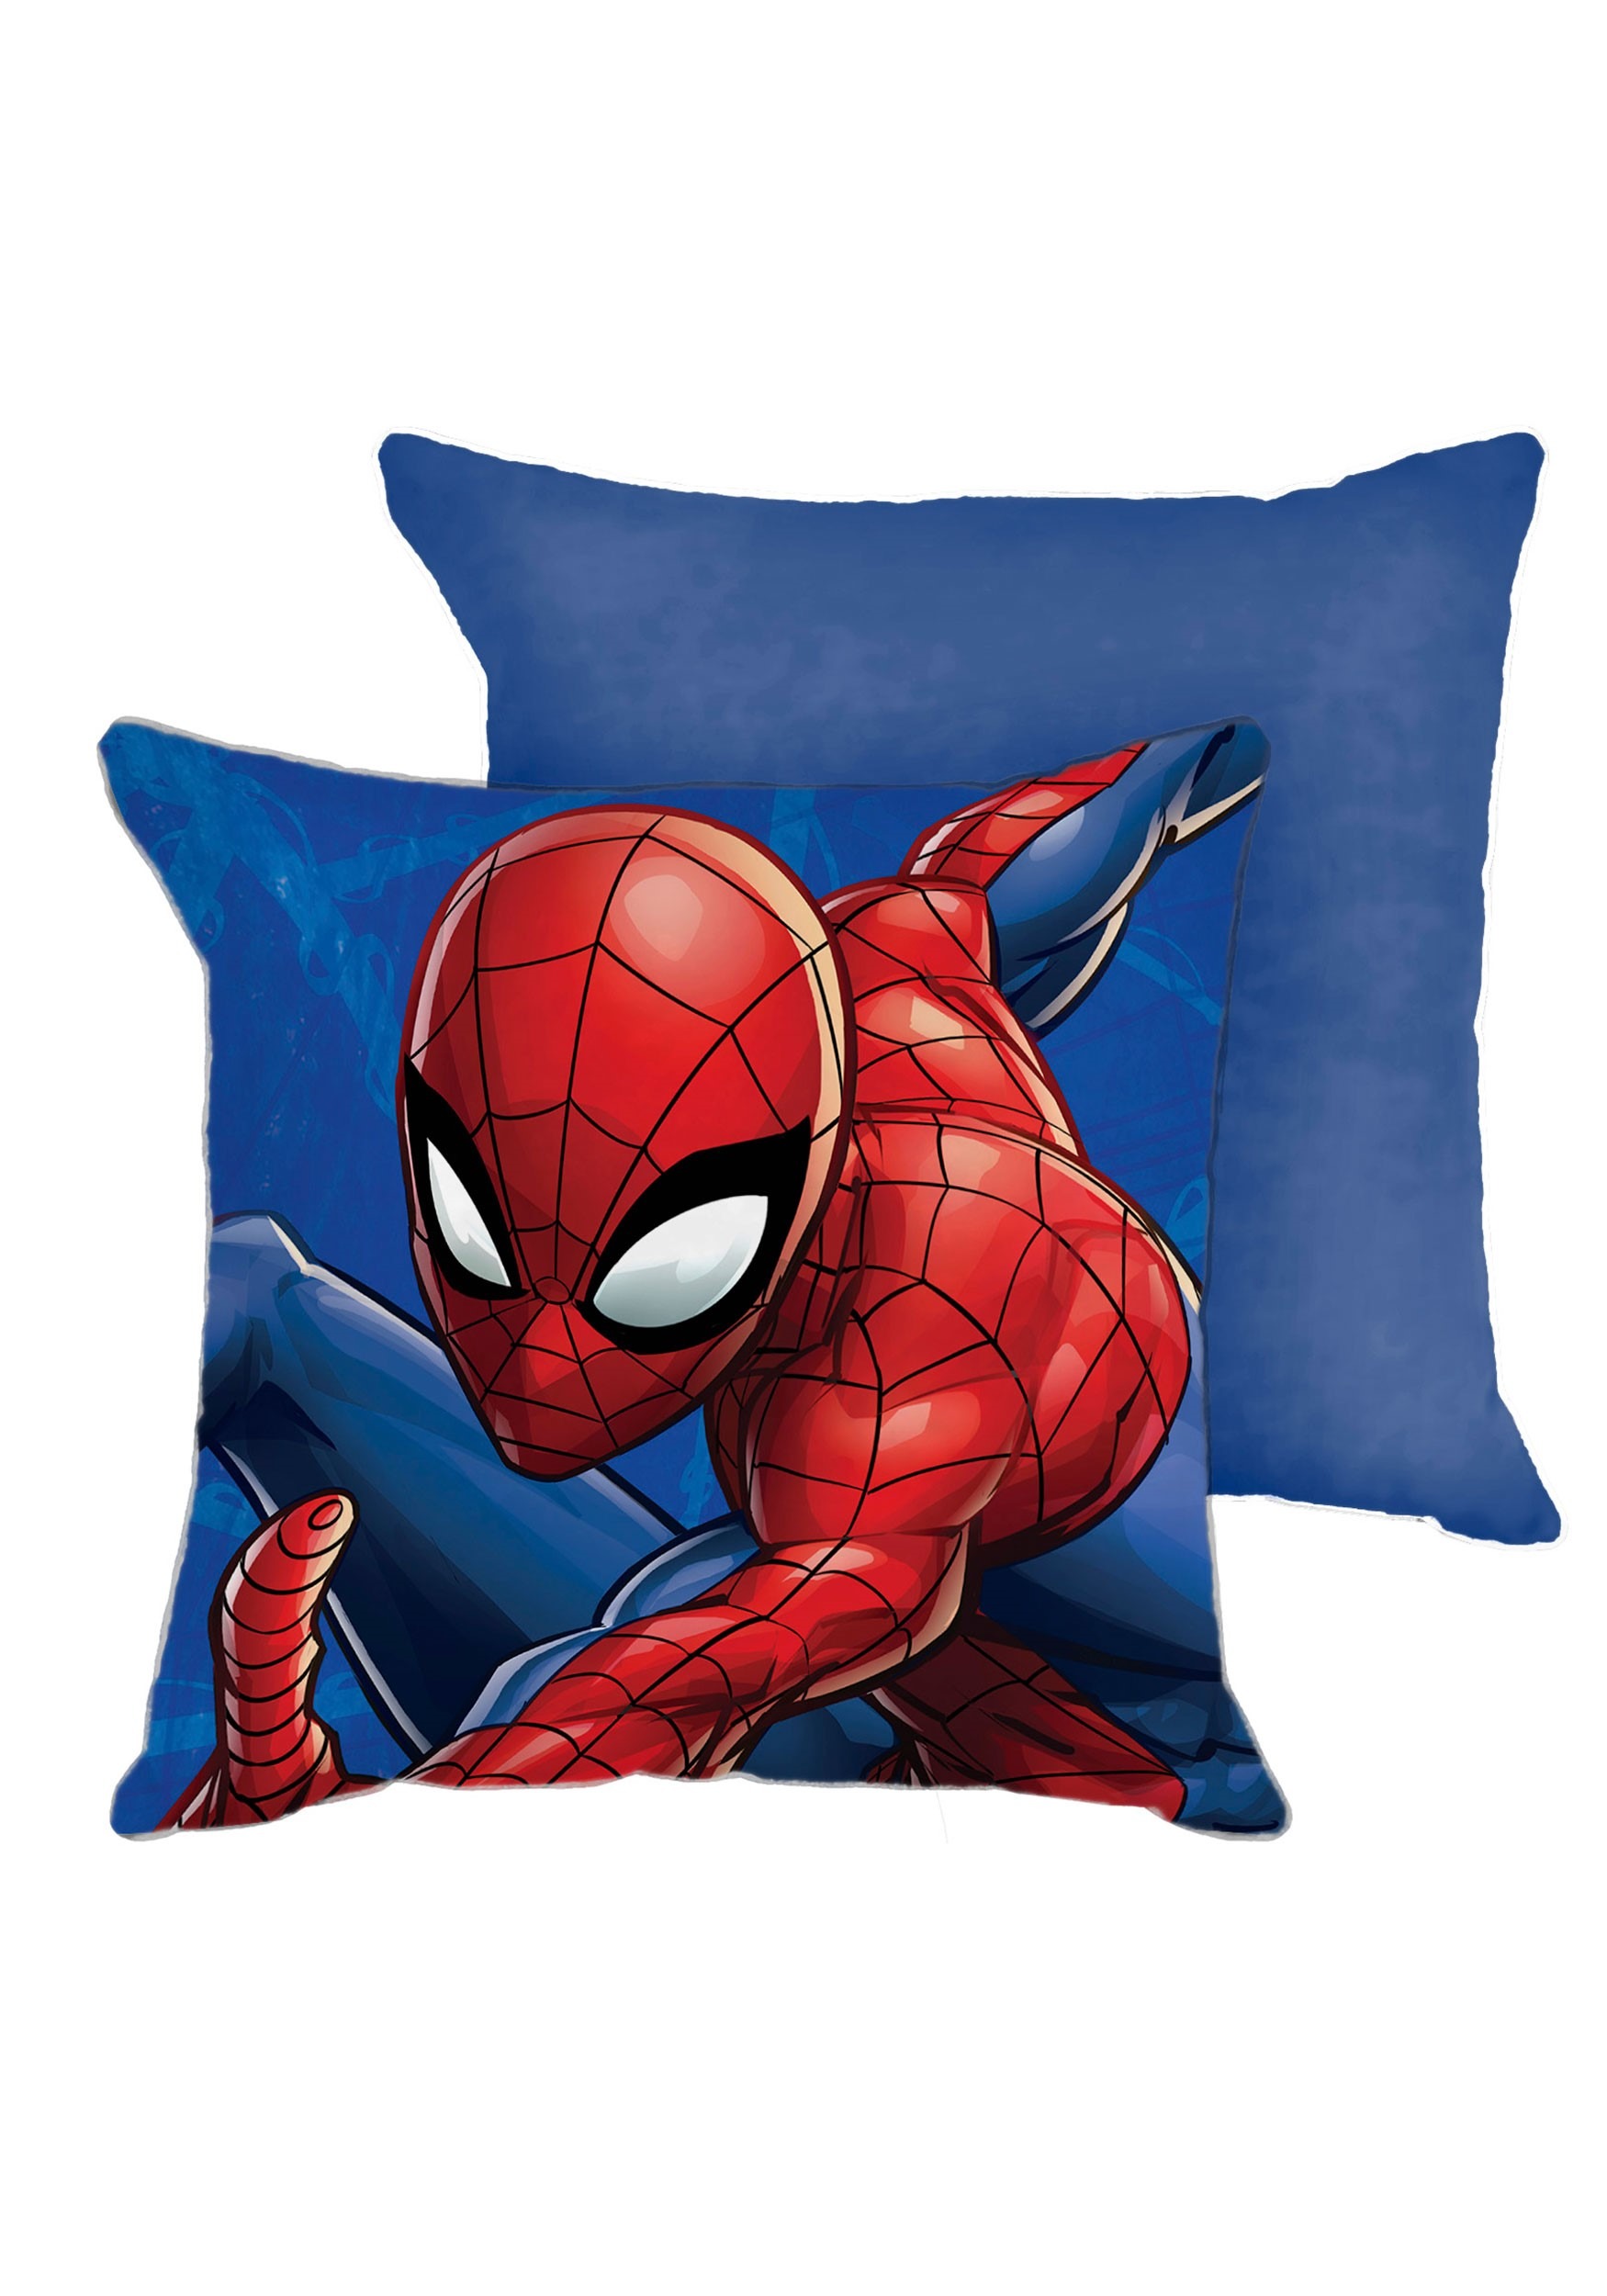 2-Pack Squishy Spiderman Decorative Pillows